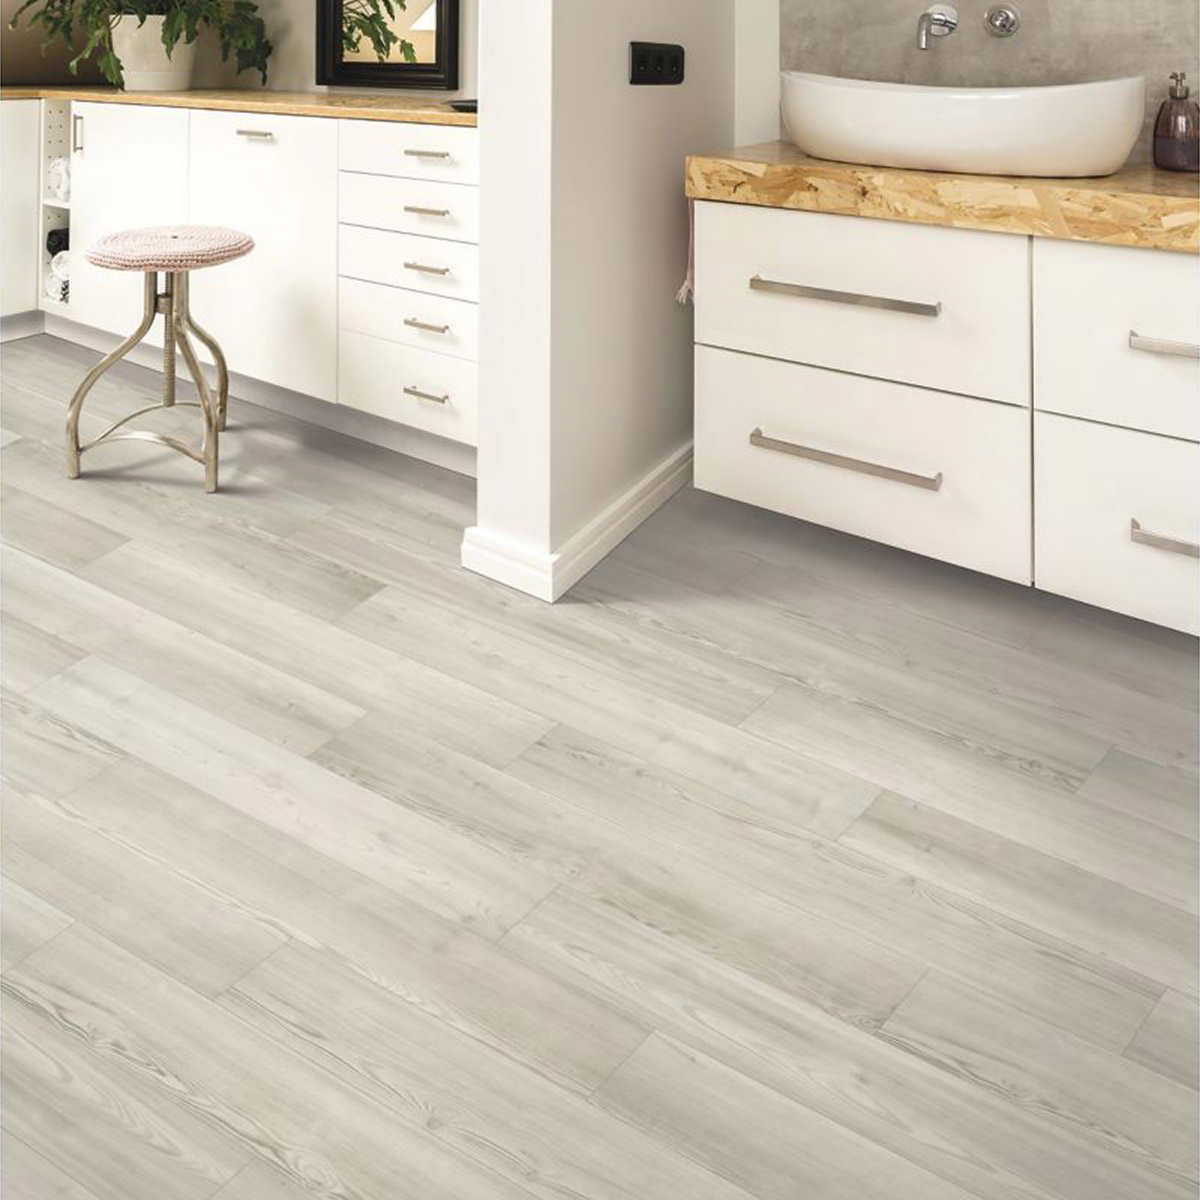 Mohawk Home Driftwinds Pine Waterproof Rigid 5mm Thick Luxury Vinyl Plank Flooring 1mm Attached Pad Included Costco